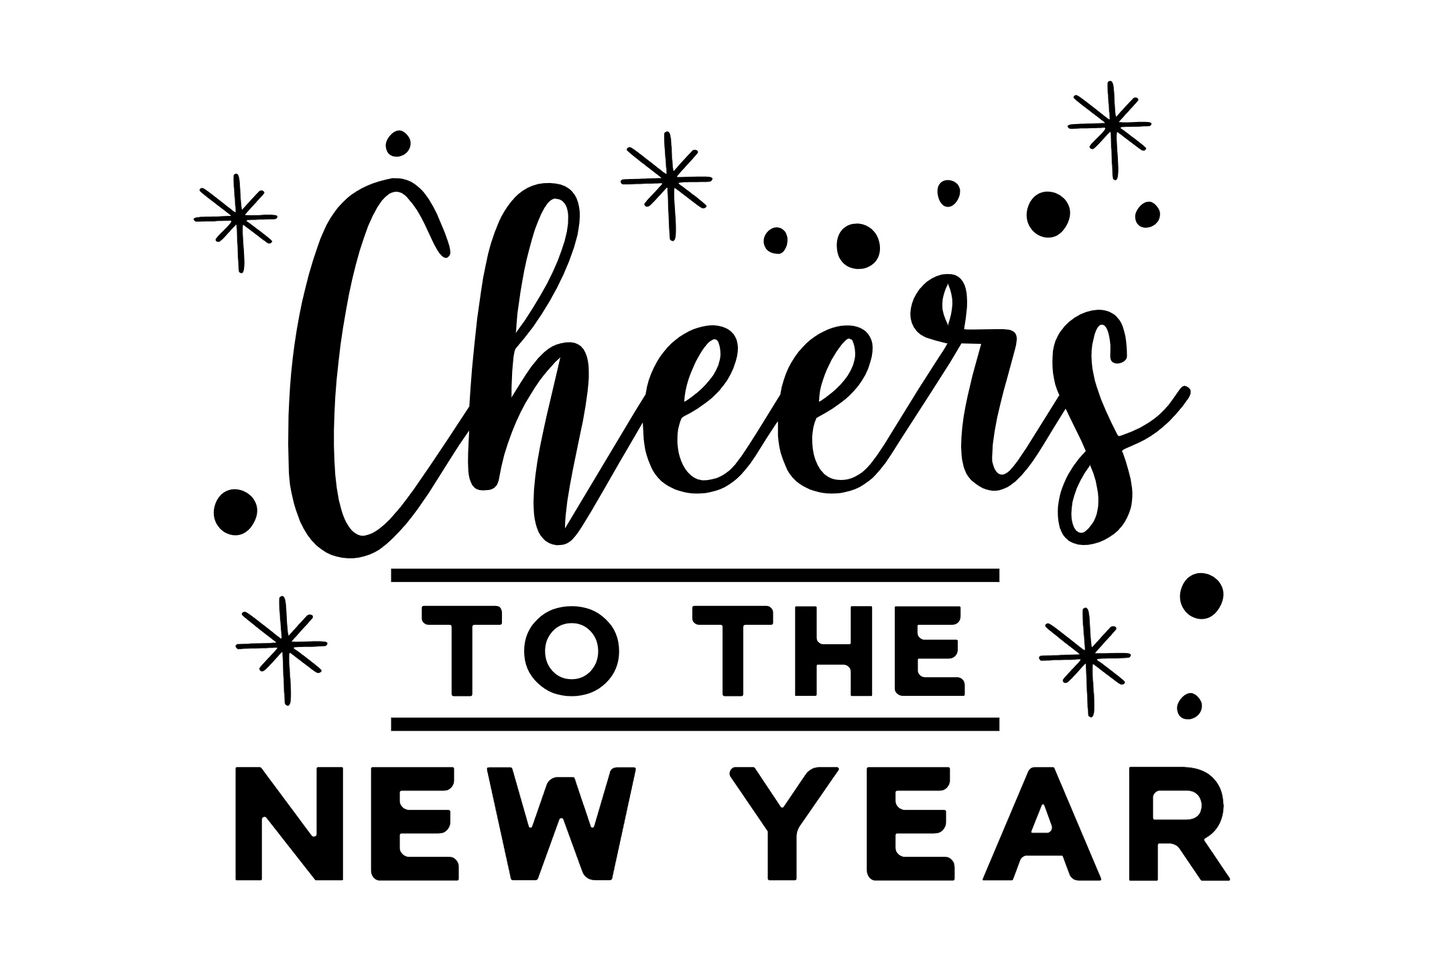 Cheers to the New Year Vinyl Add-on